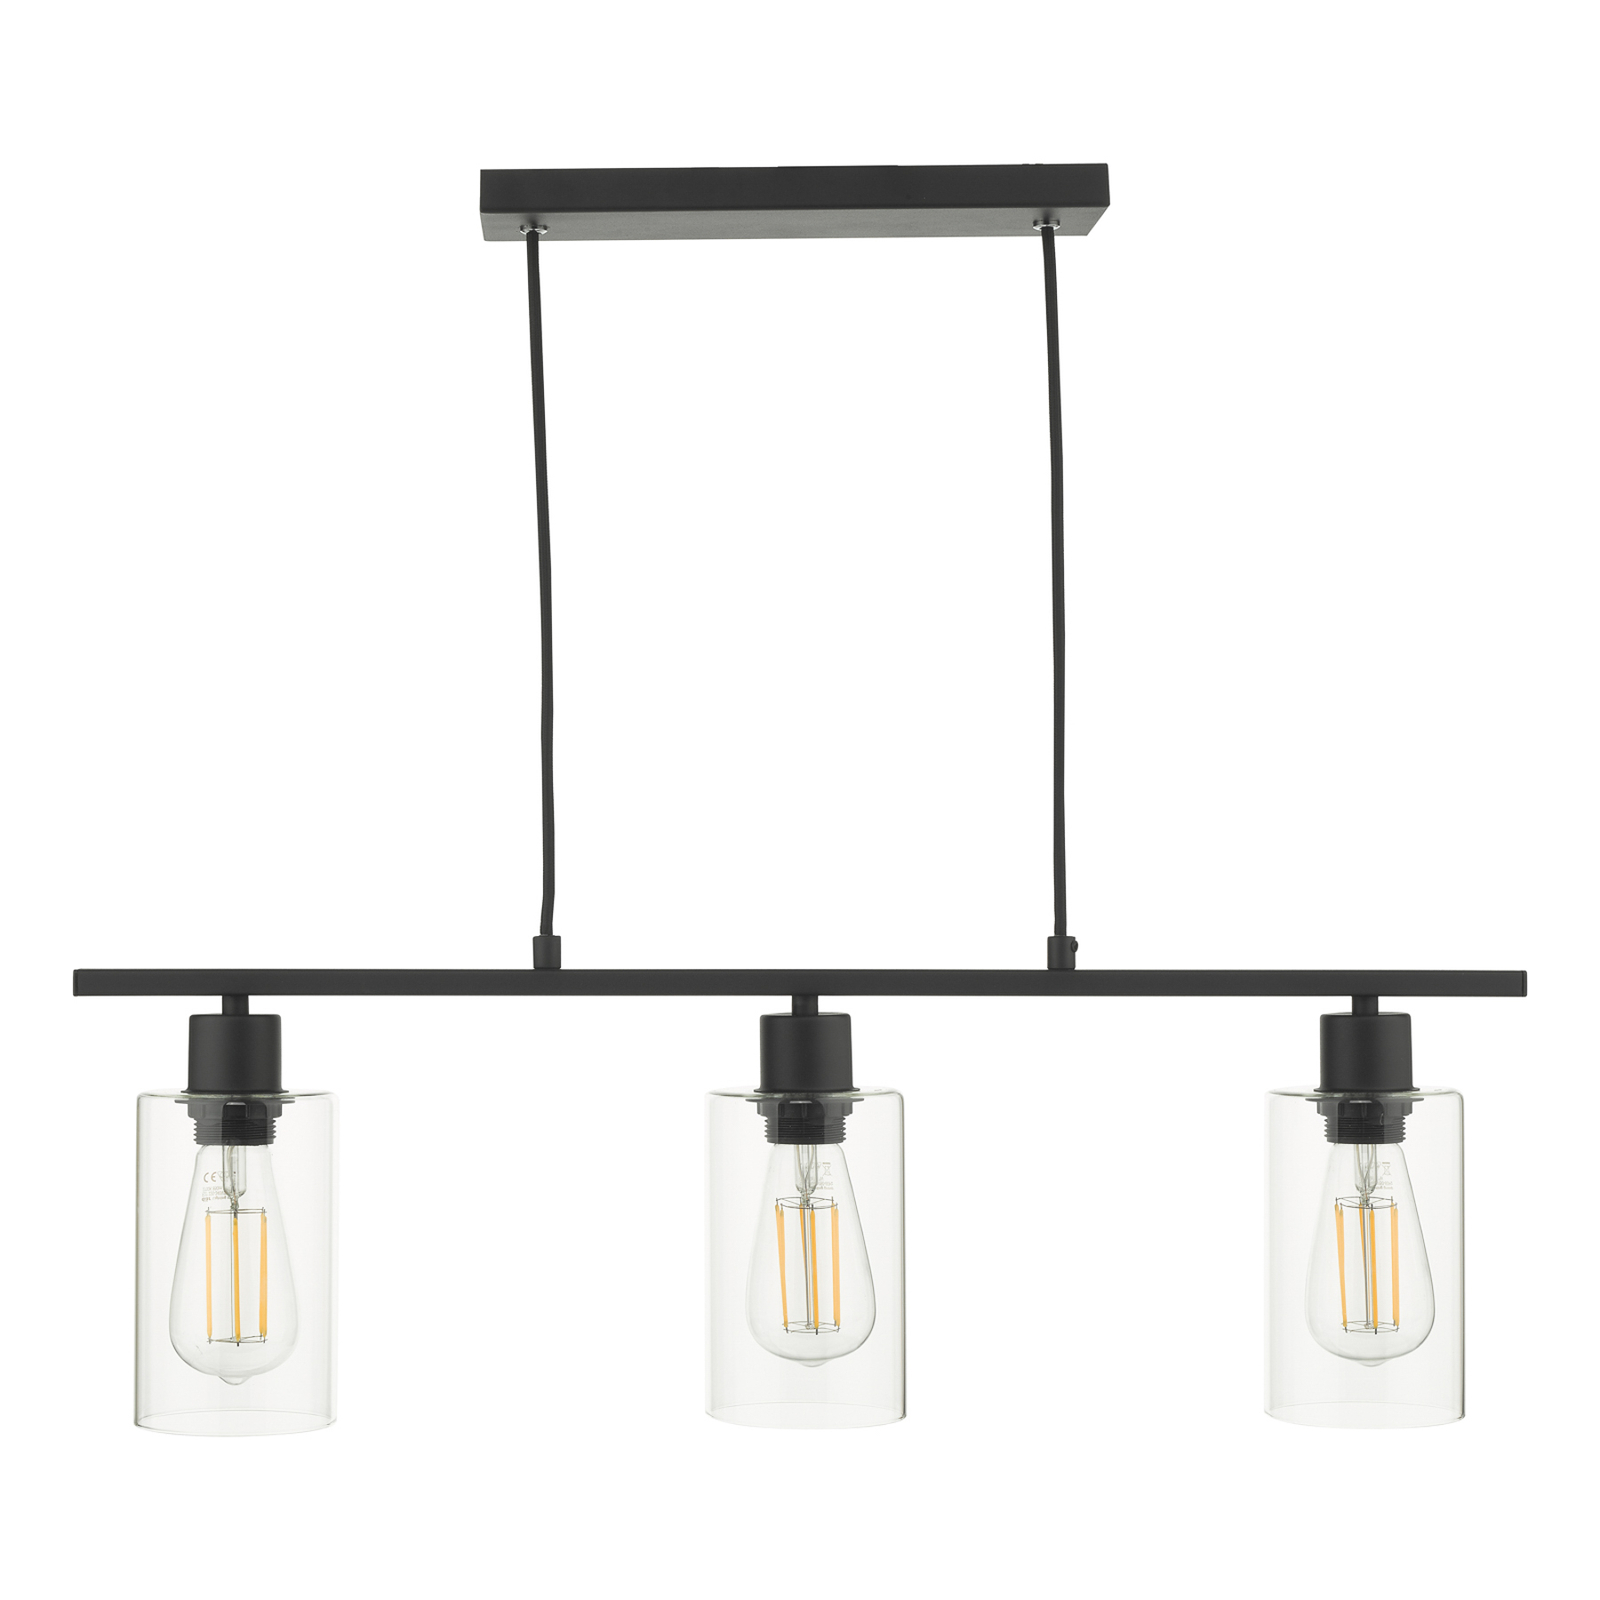 Miu pendant light in black with 3 clear lampshades